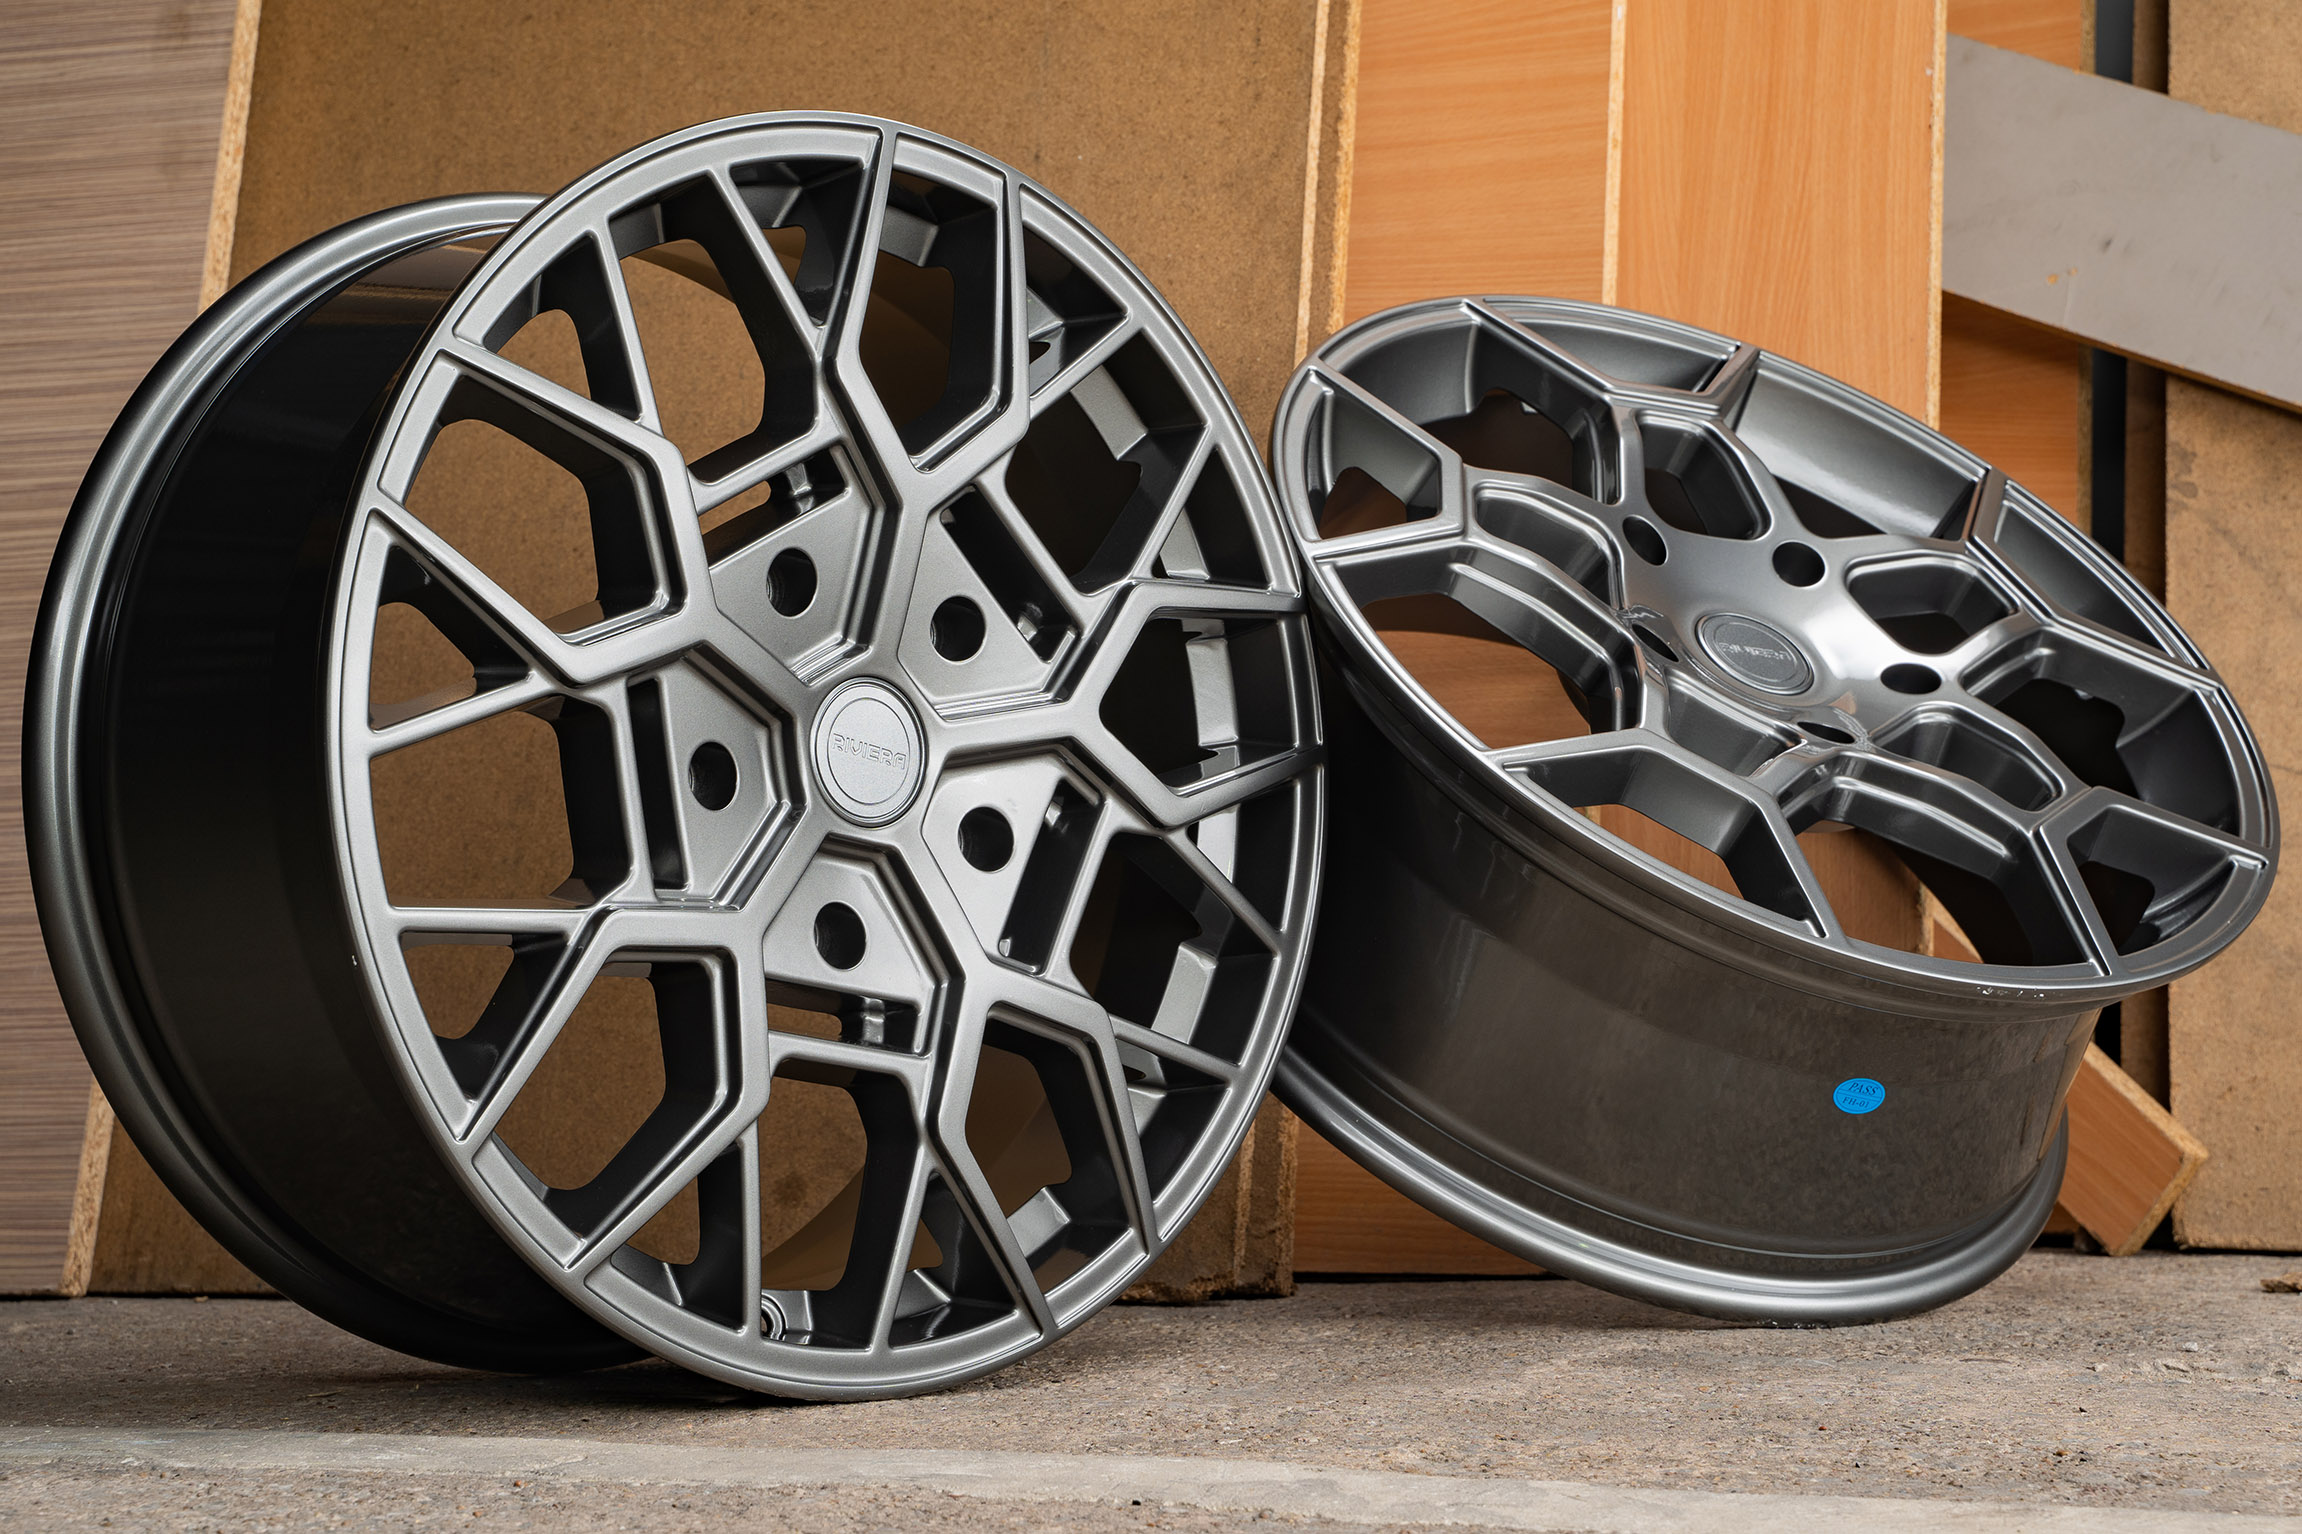 Commercial Wheels